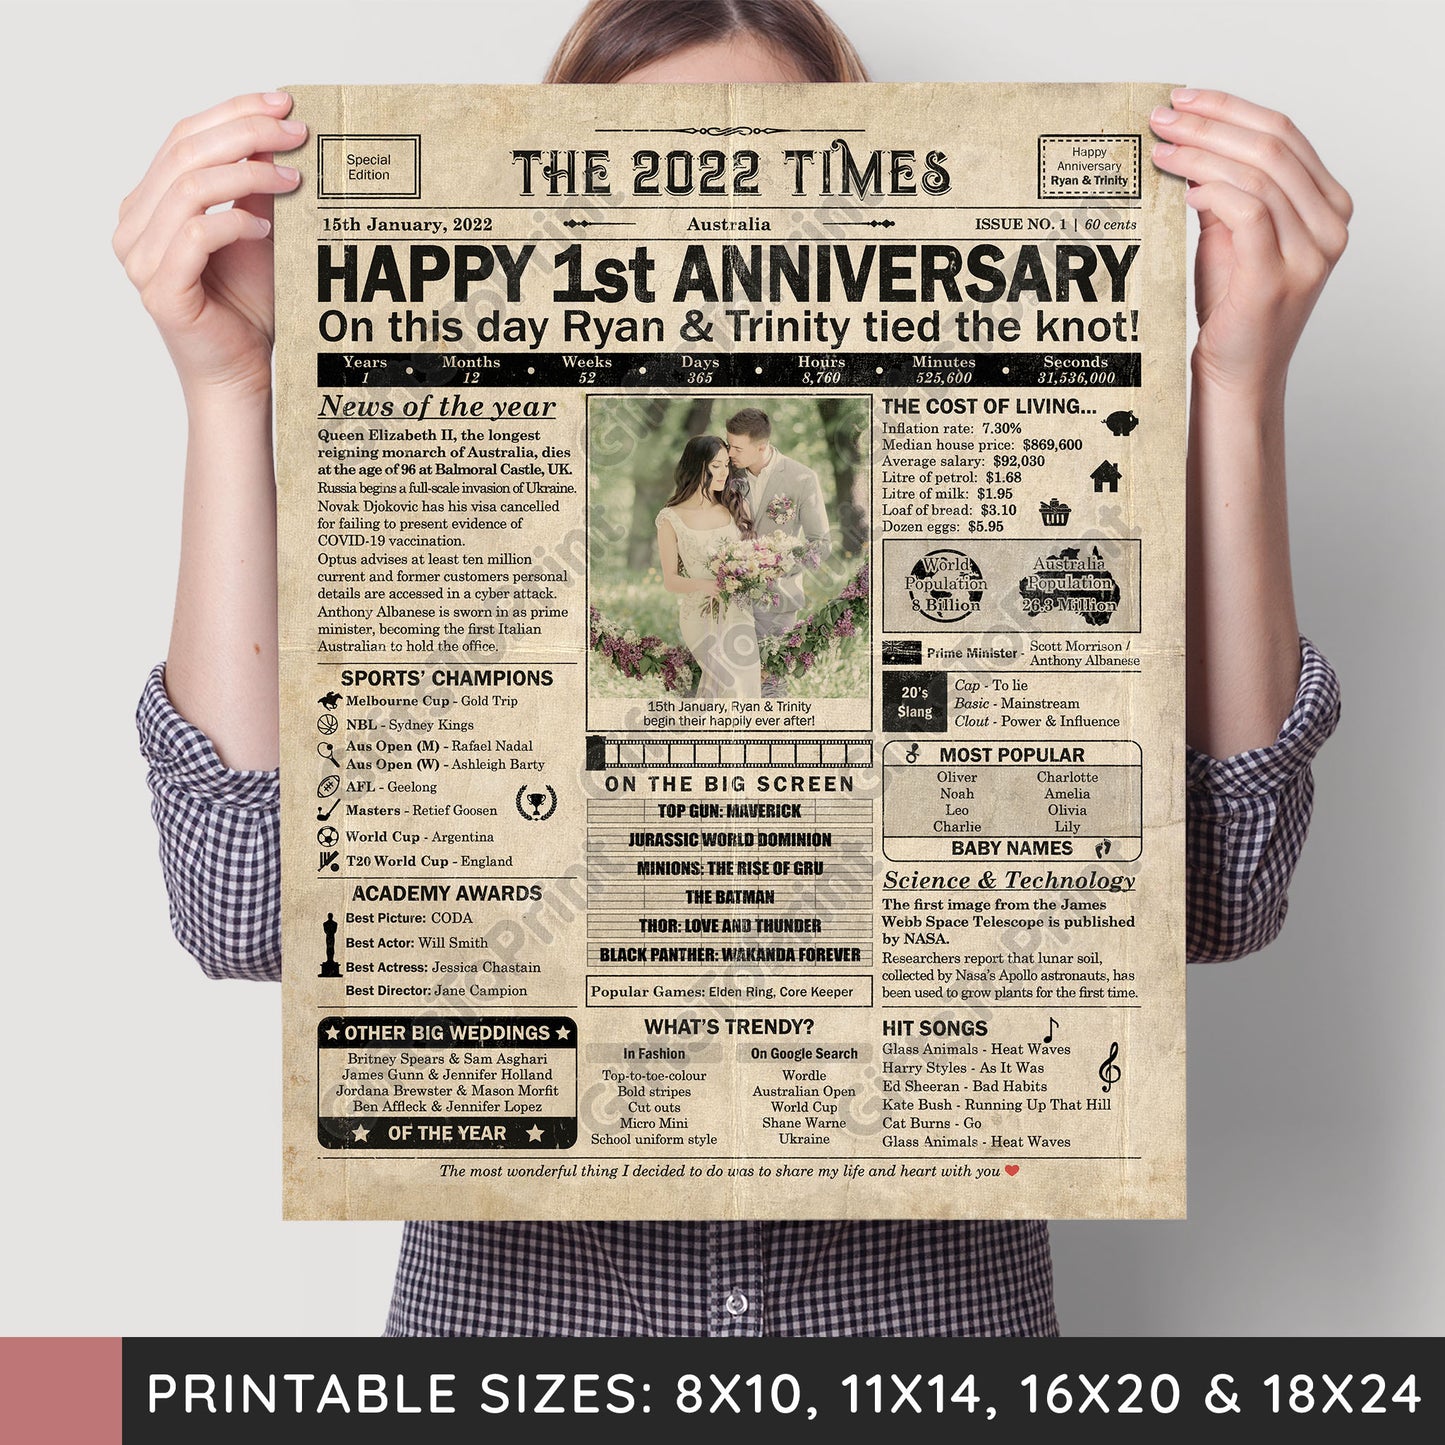 Personalised 1st Anniversary Gift: A Printable AUSTRALIAN Newspaper Poster of 2022